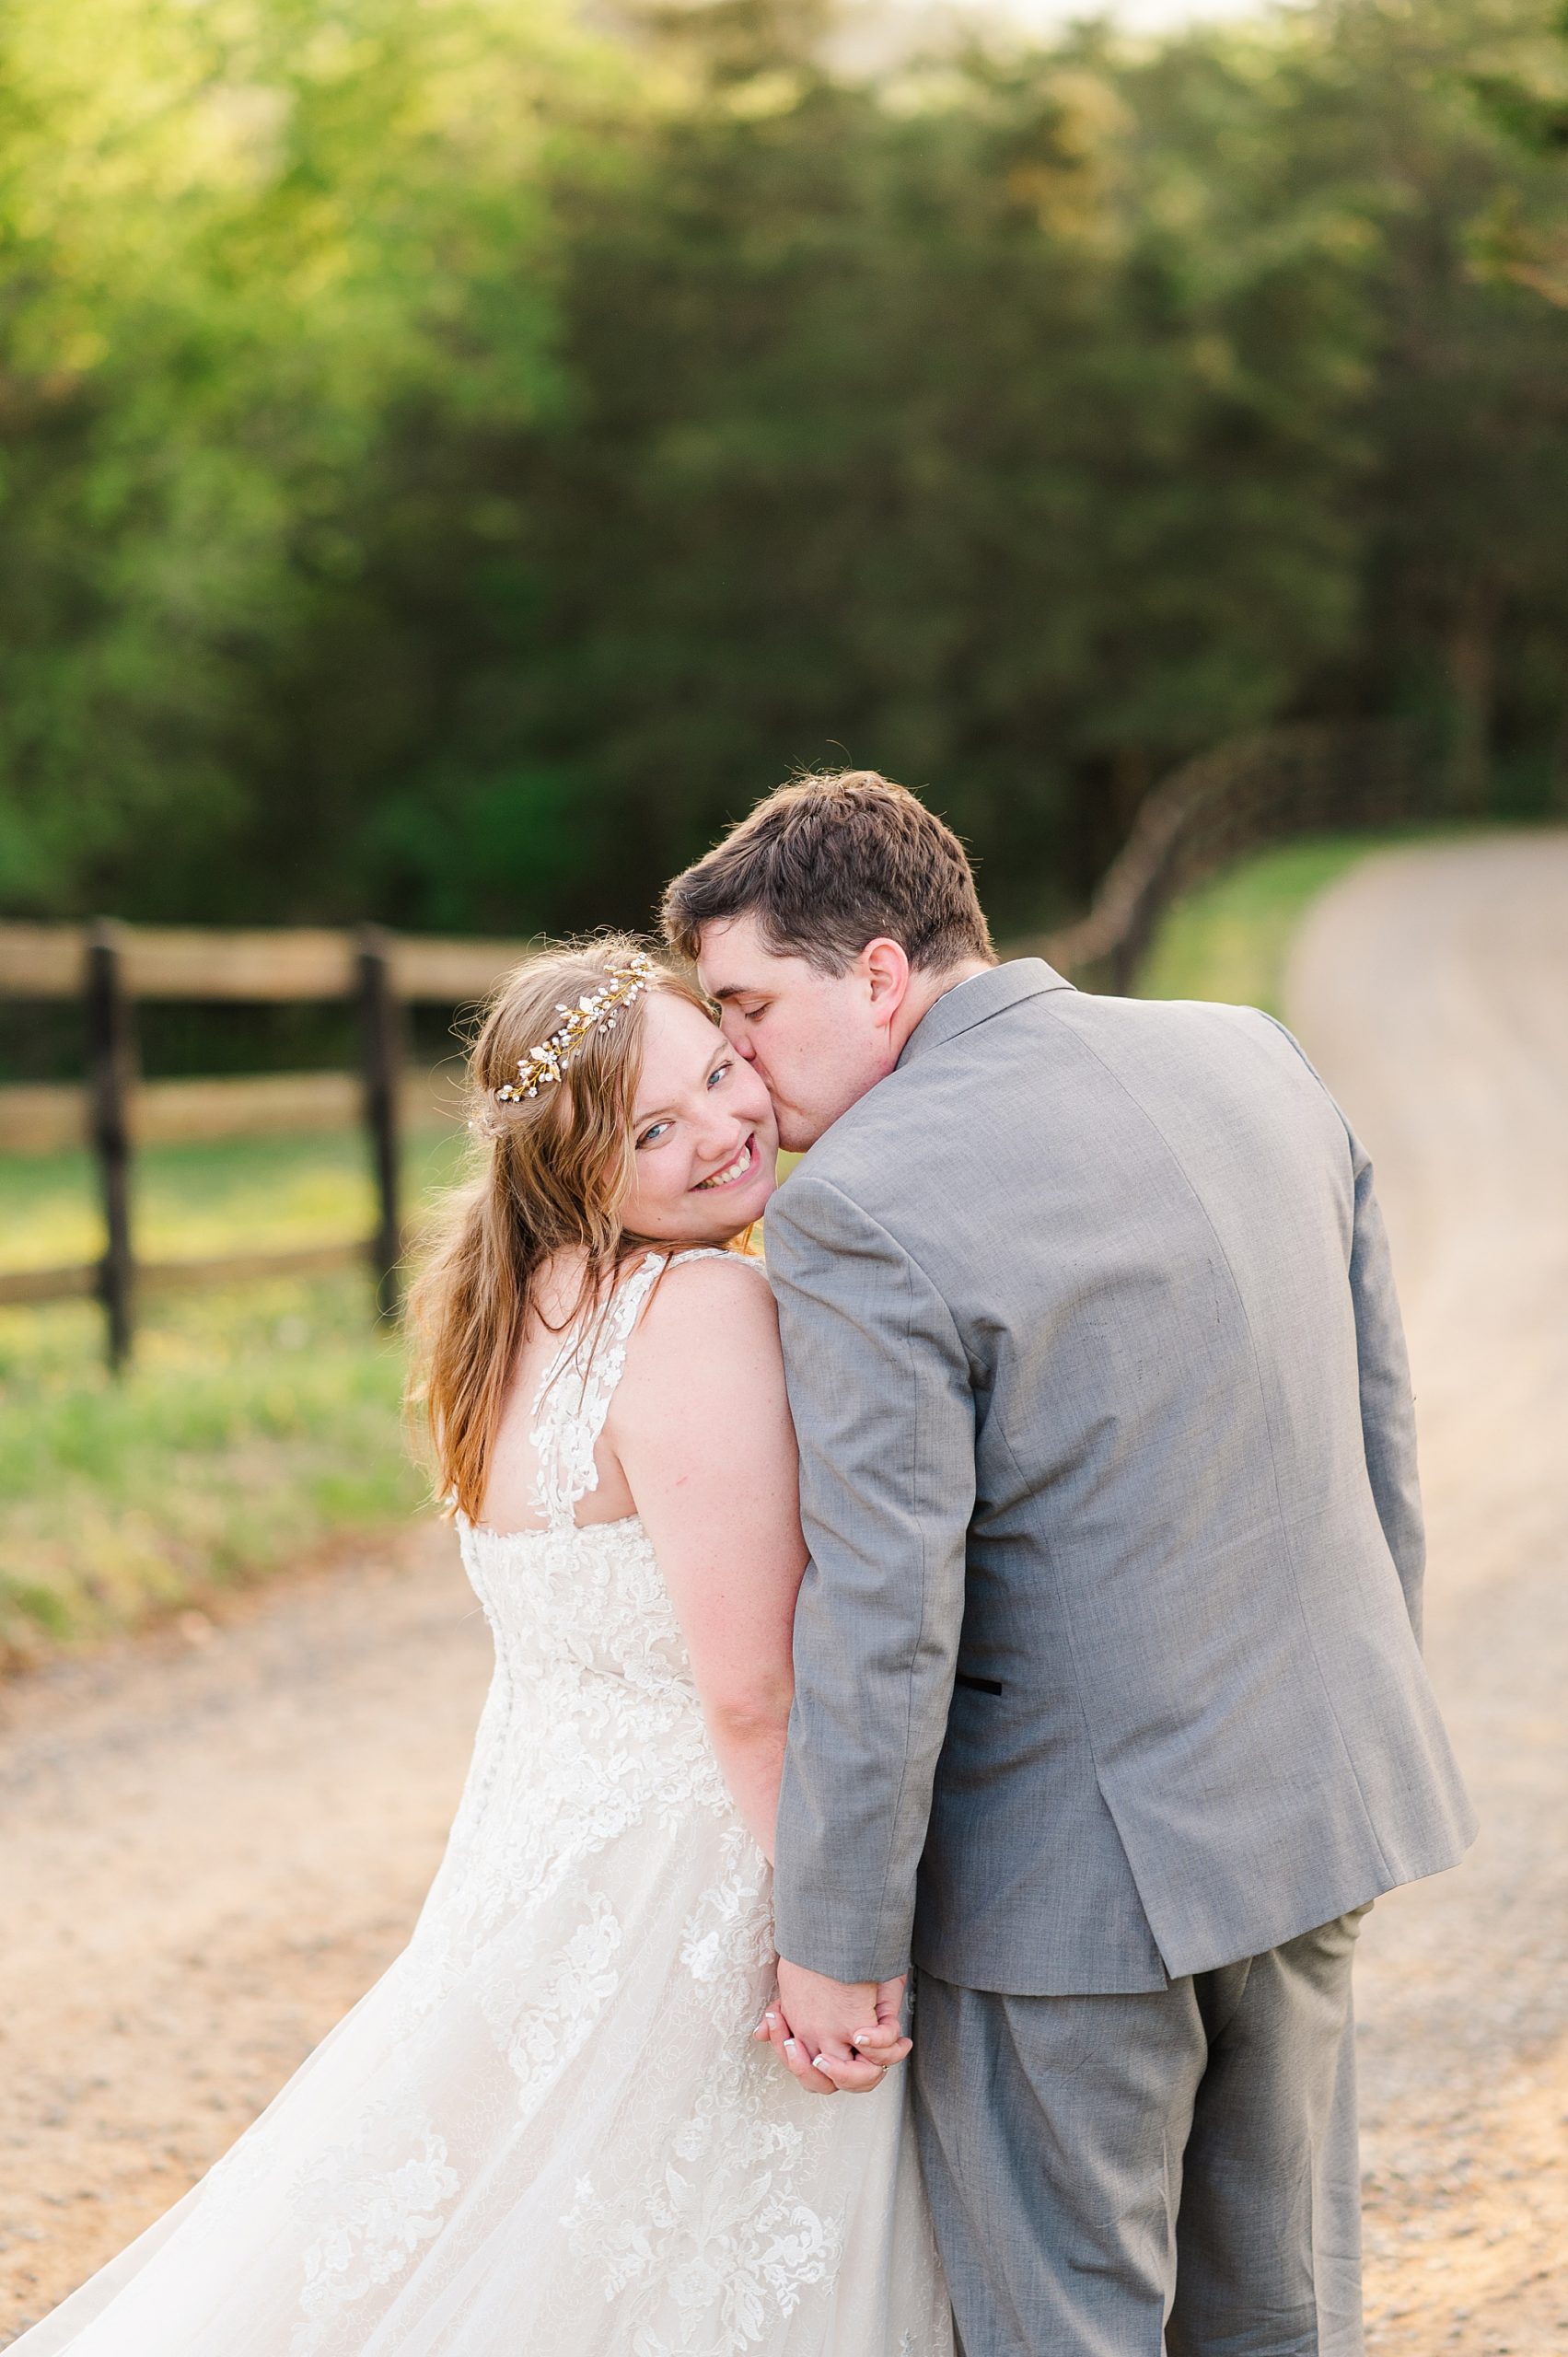 Bride and Groom Portraits at Wedding at Wolftrap Farm. Wedding Photography by Kailey Brianne Photography